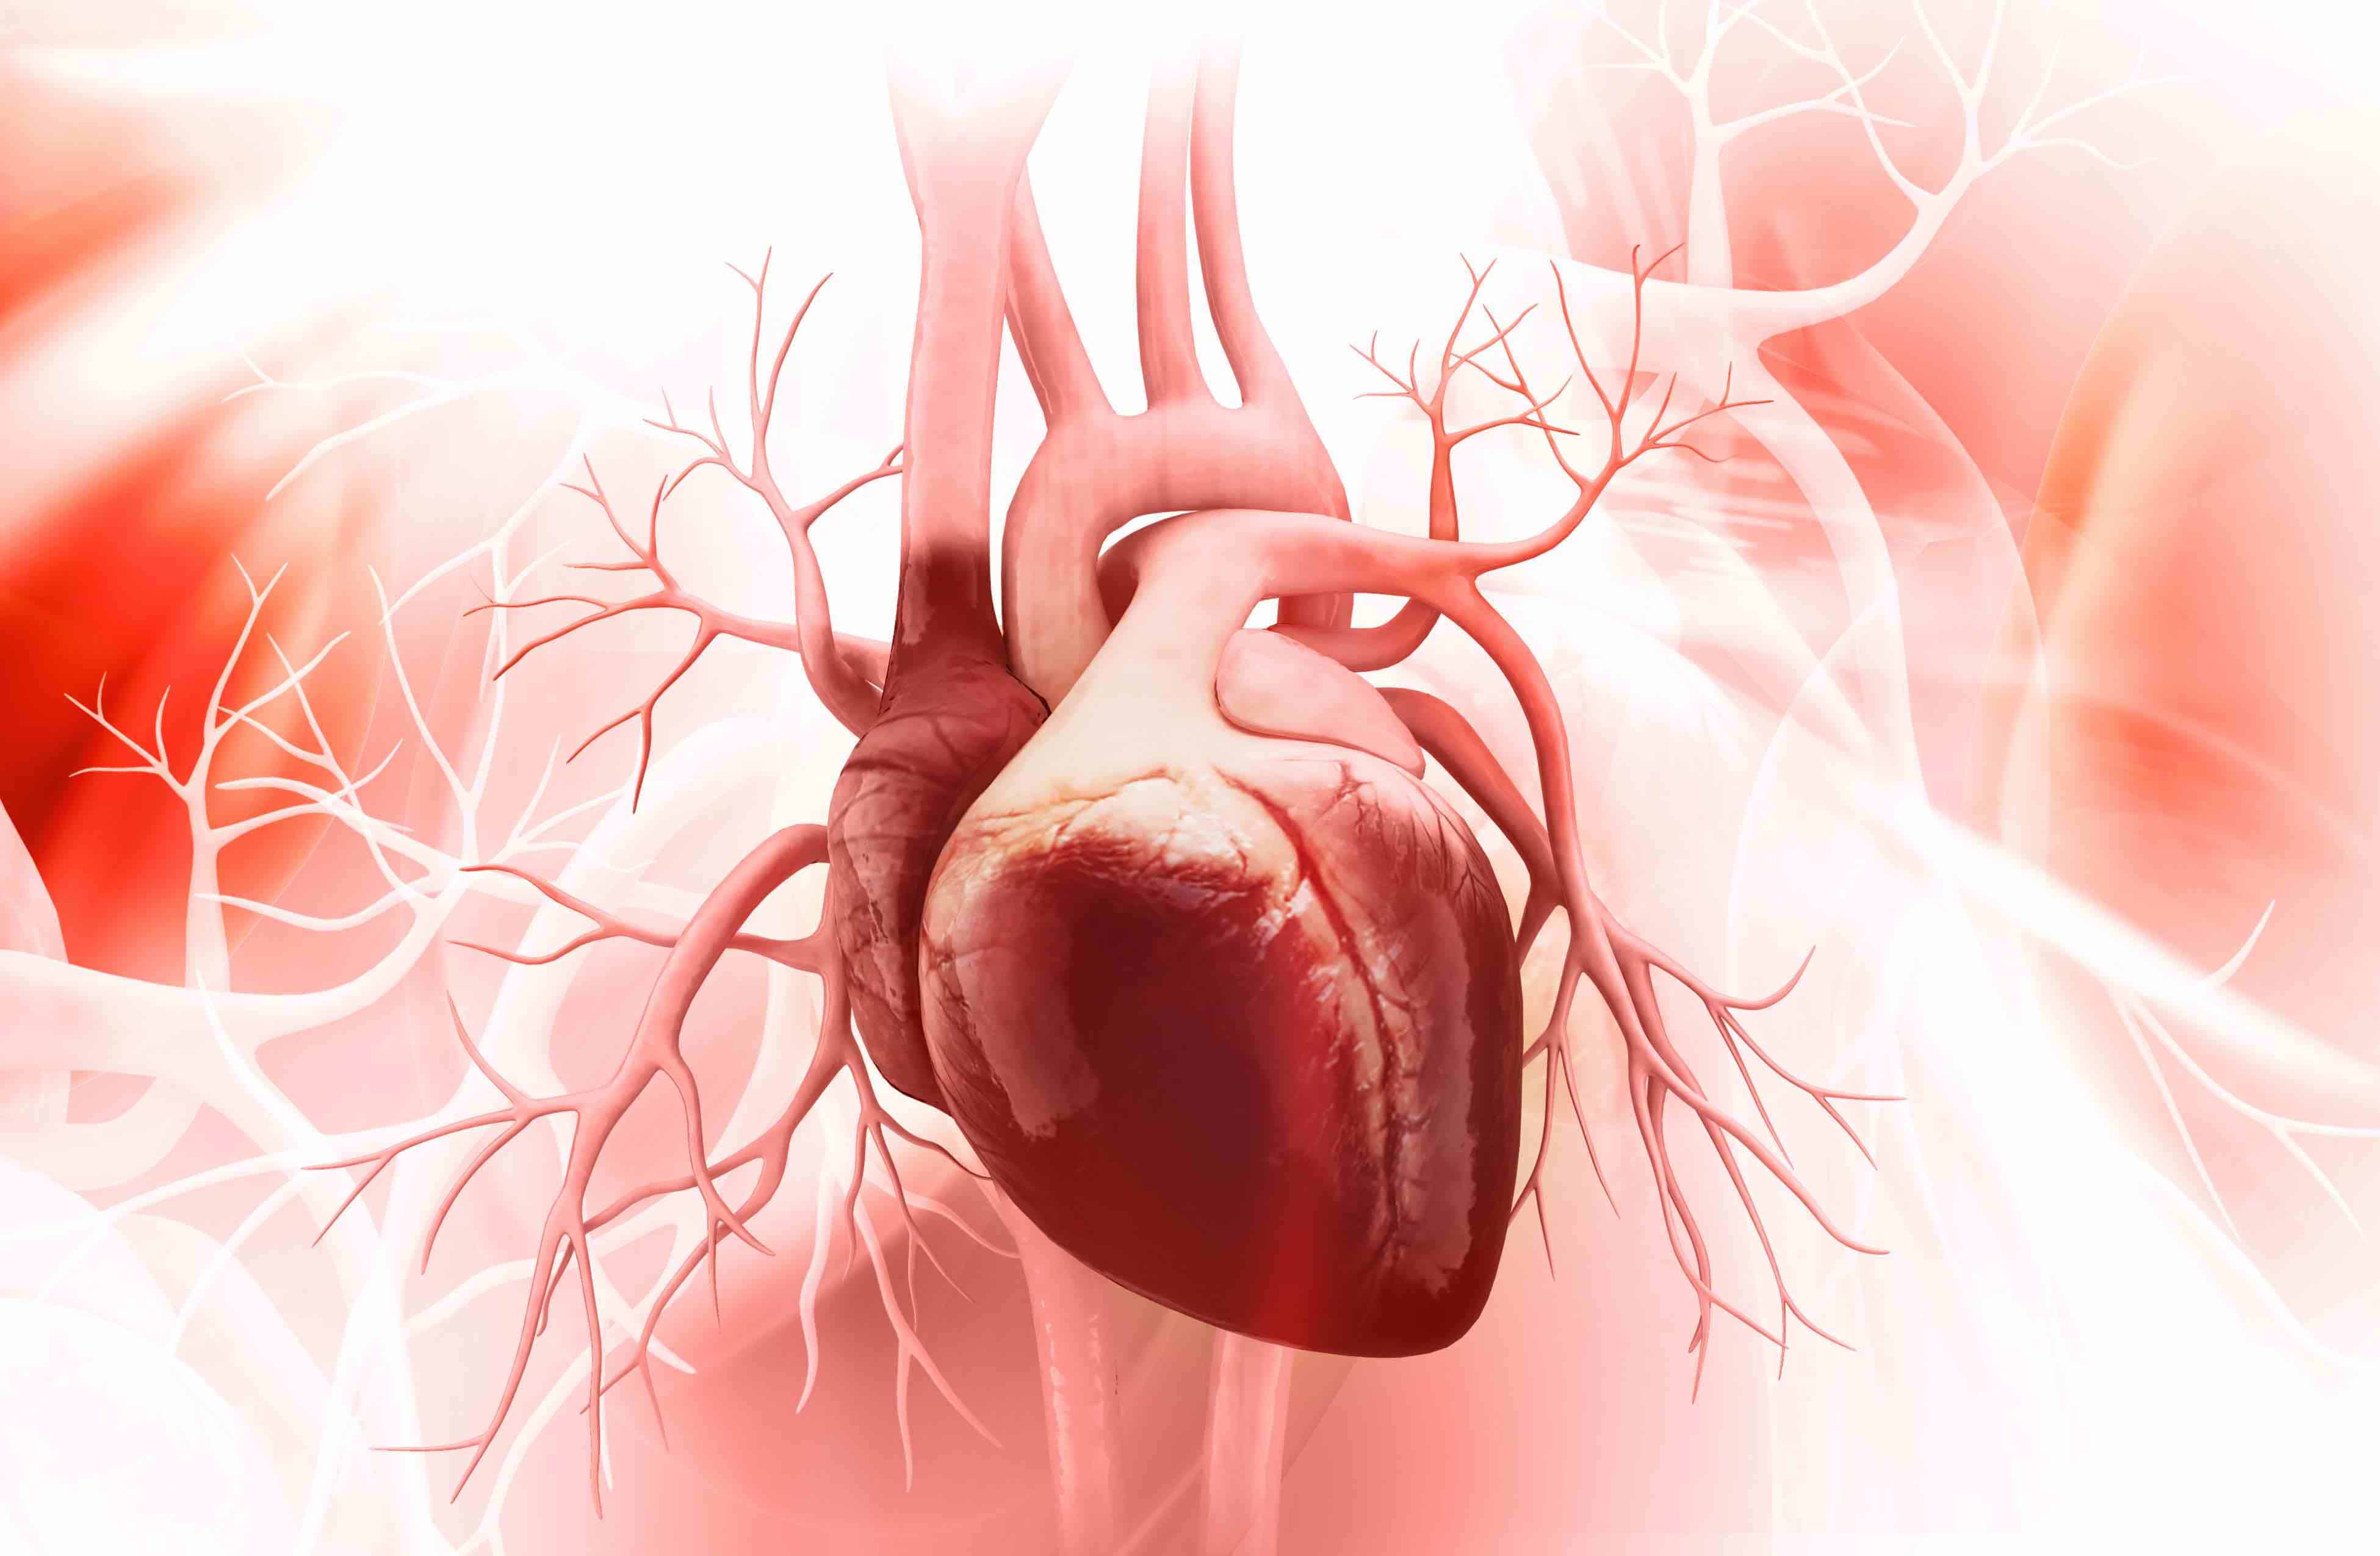 24 Fun Facts About the Heart